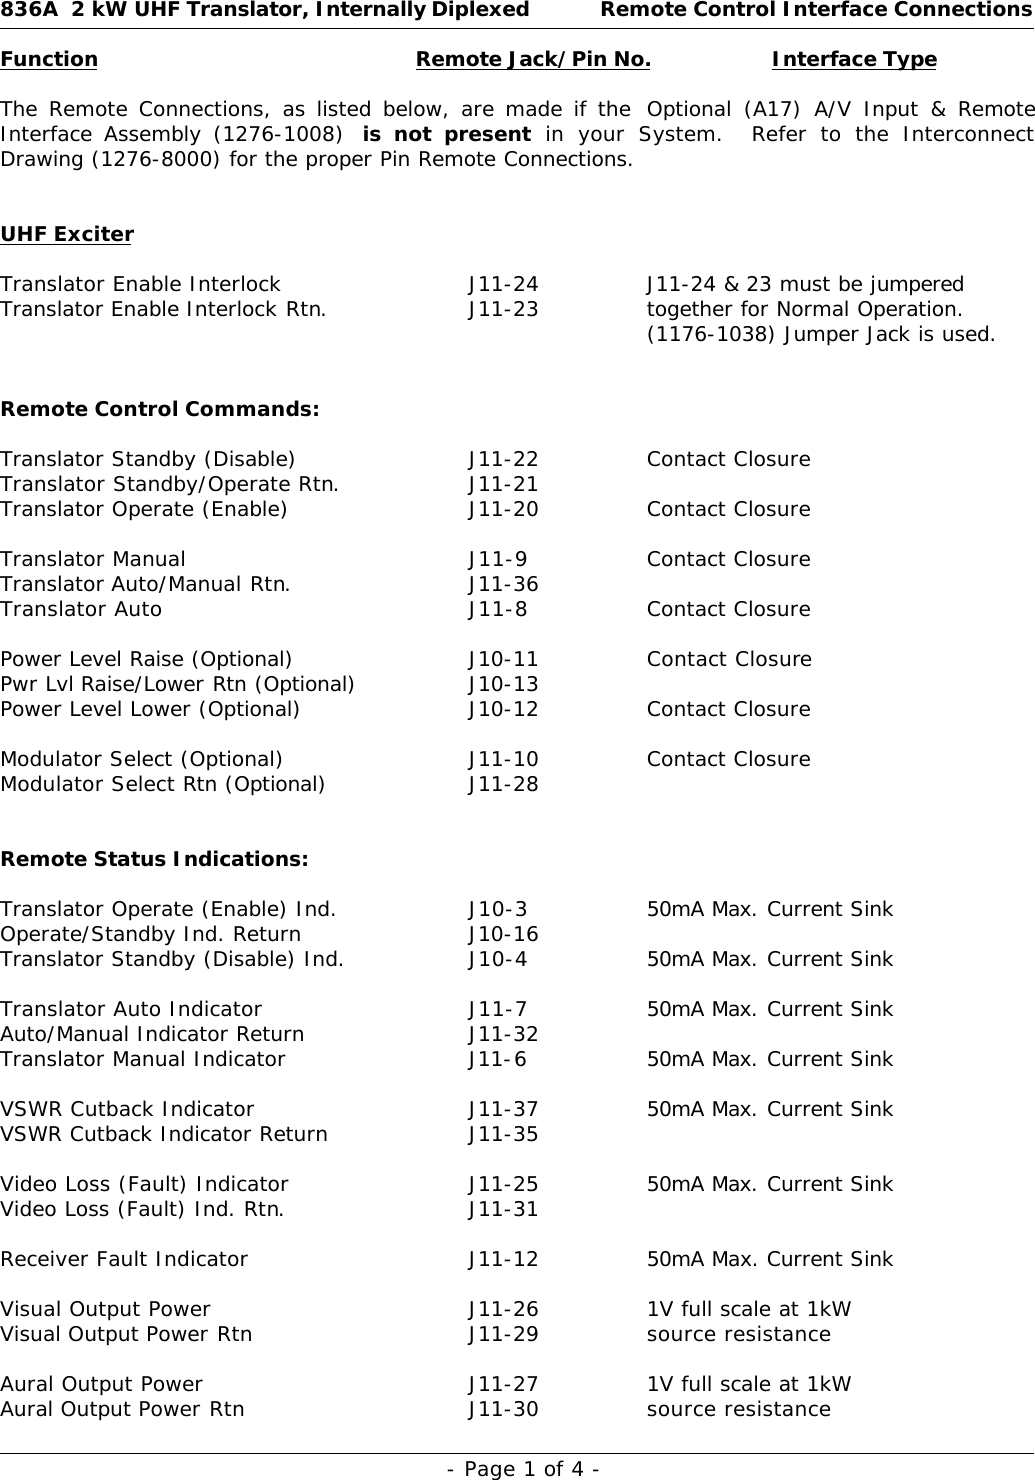 836A  2 kW UHF Translator, Internally Diplexed Remote Control Interface ConnectionsFunction Remote Jack/Pin No. Interface Type- Page 1 of 4 -The Remote Connections, as listed below, are made if the  Optional (A17) A/V Input &amp; RemoteInterface Assembly (1276-1008)  is not present in your System.  Refer to the InterconnectDrawing (1276-8000) for the proper Pin Remote Connections.UHF ExciterTranslator Enable Interlock J11-24 J11-24 &amp; 23 must be jumperedTranslator Enable Interlock Rtn.J11-23 together for Normal Operation.(1176-1038) Jumper Jack is used.Remote Control Commands:Translator Standby (Disable) J11-22 Contact ClosureTranslator Standby/Operate Rtn.J11-21Translator Operate (Enable) J11-20 Contact ClosureTranslator Manual J11-9 Contact ClosureTranslator Auto/Manual Rtn.J11-36Translator Auto J11-8 Contact ClosurePower Level Raise (Optional) J10-11 Contact ClosurePwr Lvl Raise/Lower Rtn (Optional) J10-13Power Level Lower (Optional) J10-12 Contact ClosureModulator Select (Optional) J11-10 Contact ClosureModulator Select Rtn (Optional) J11-28Remote Status Indications:Translator Operate (Enable) Ind. J10-3 50mA Max. Current SinkOperate/Standby Ind. Return J10-16Translator Standby (Disable) Ind. J10-4 50mA Max. Current SinkTranslator Auto Indicator J11-7 50mA Max. Current SinkAuto/Manual Indicator Return J11-32Translator Manual Indicator J11-650mA Max. Current SinkVSWR Cutback Indicator J11-37 50mA Max. Current SinkVSWR Cutback Indicator Return J11-35Video Loss (Fault) Indicator J11-25 50mA Max. Current SinkVideo Loss (Fault) Ind. Rtn.J11-31Receiver Fault Indicator J11-12 50mA Max. Current SinkVisual Output Power J11-26 1V full scale at 1kWVisual Output Power Rtn J11-29 source resistanceAural Output Power J11-27 1V full scale at 1kWAural Output Power Rtn J11-30 source resistance